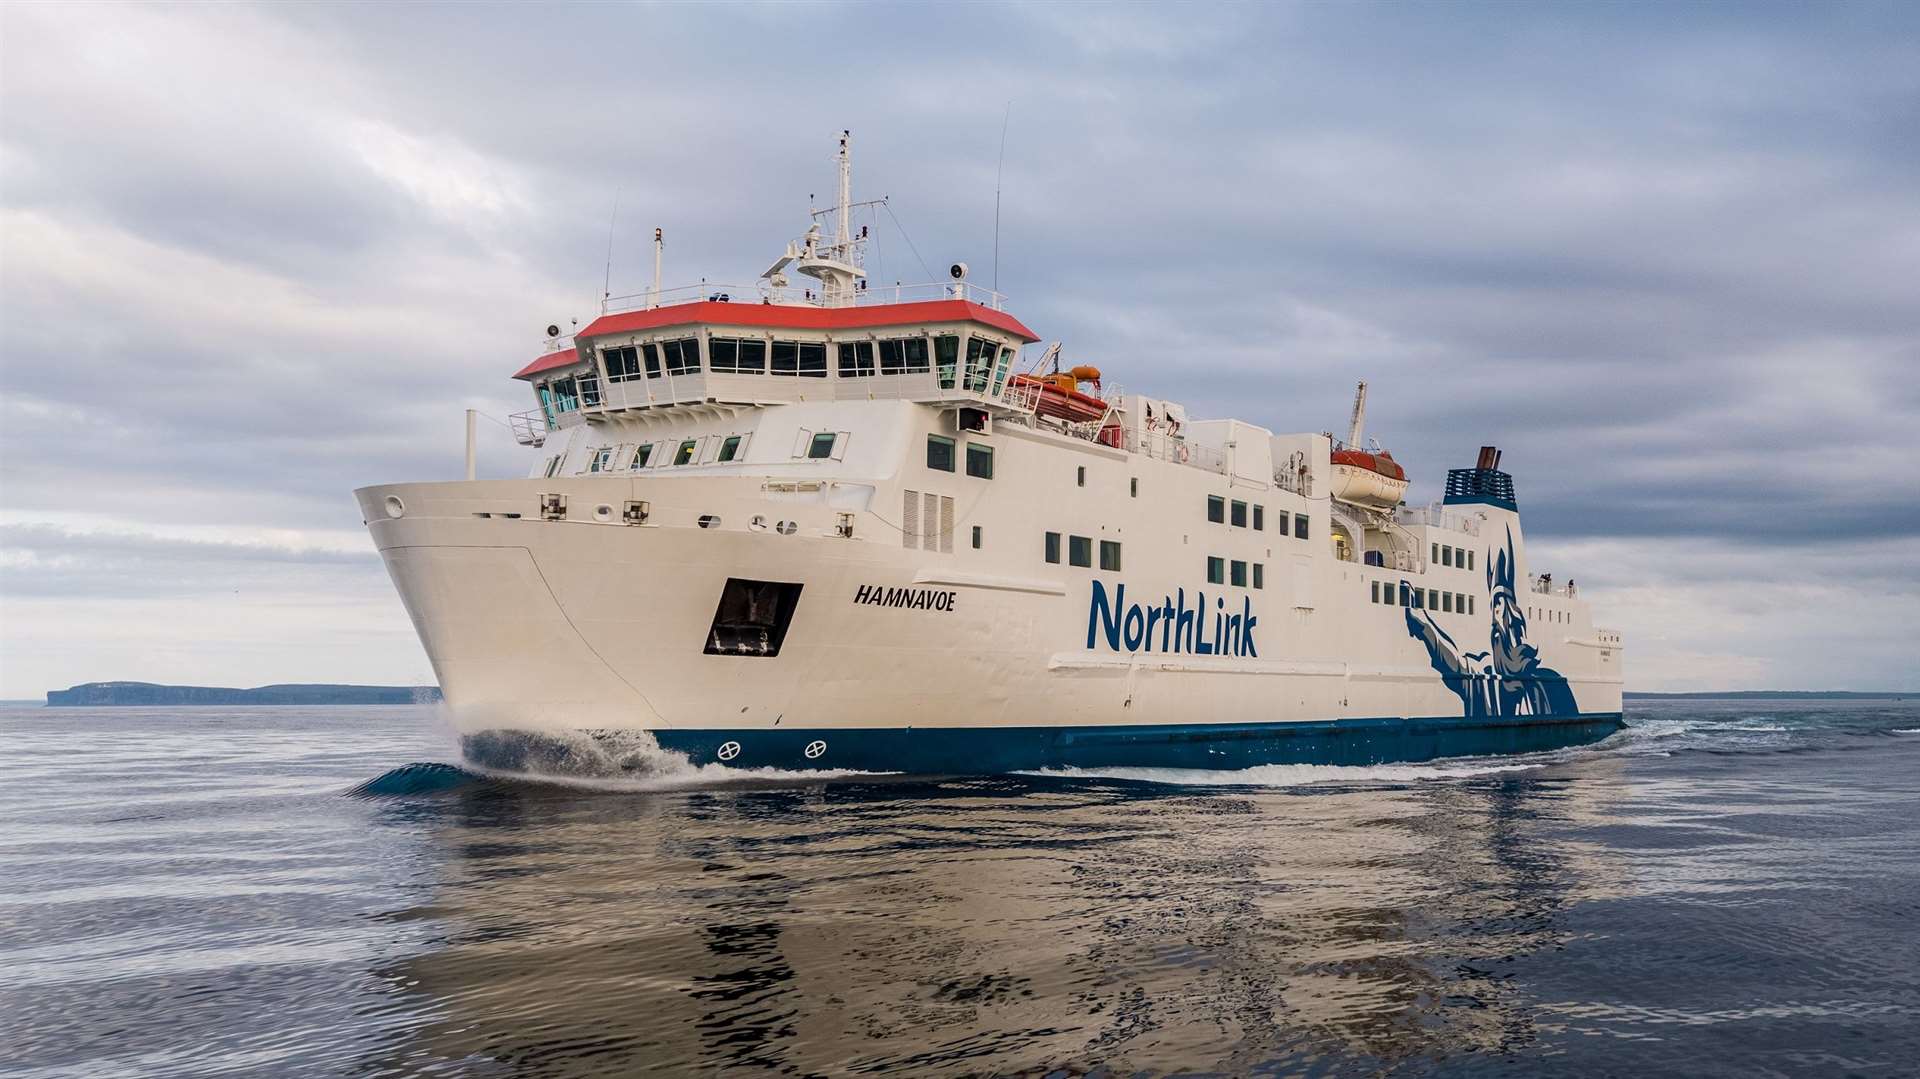 The Hamnavoe will make an additional return crossing on the Stromness/Scrabster route on a Sunday. Picture: NorthLink Ferries